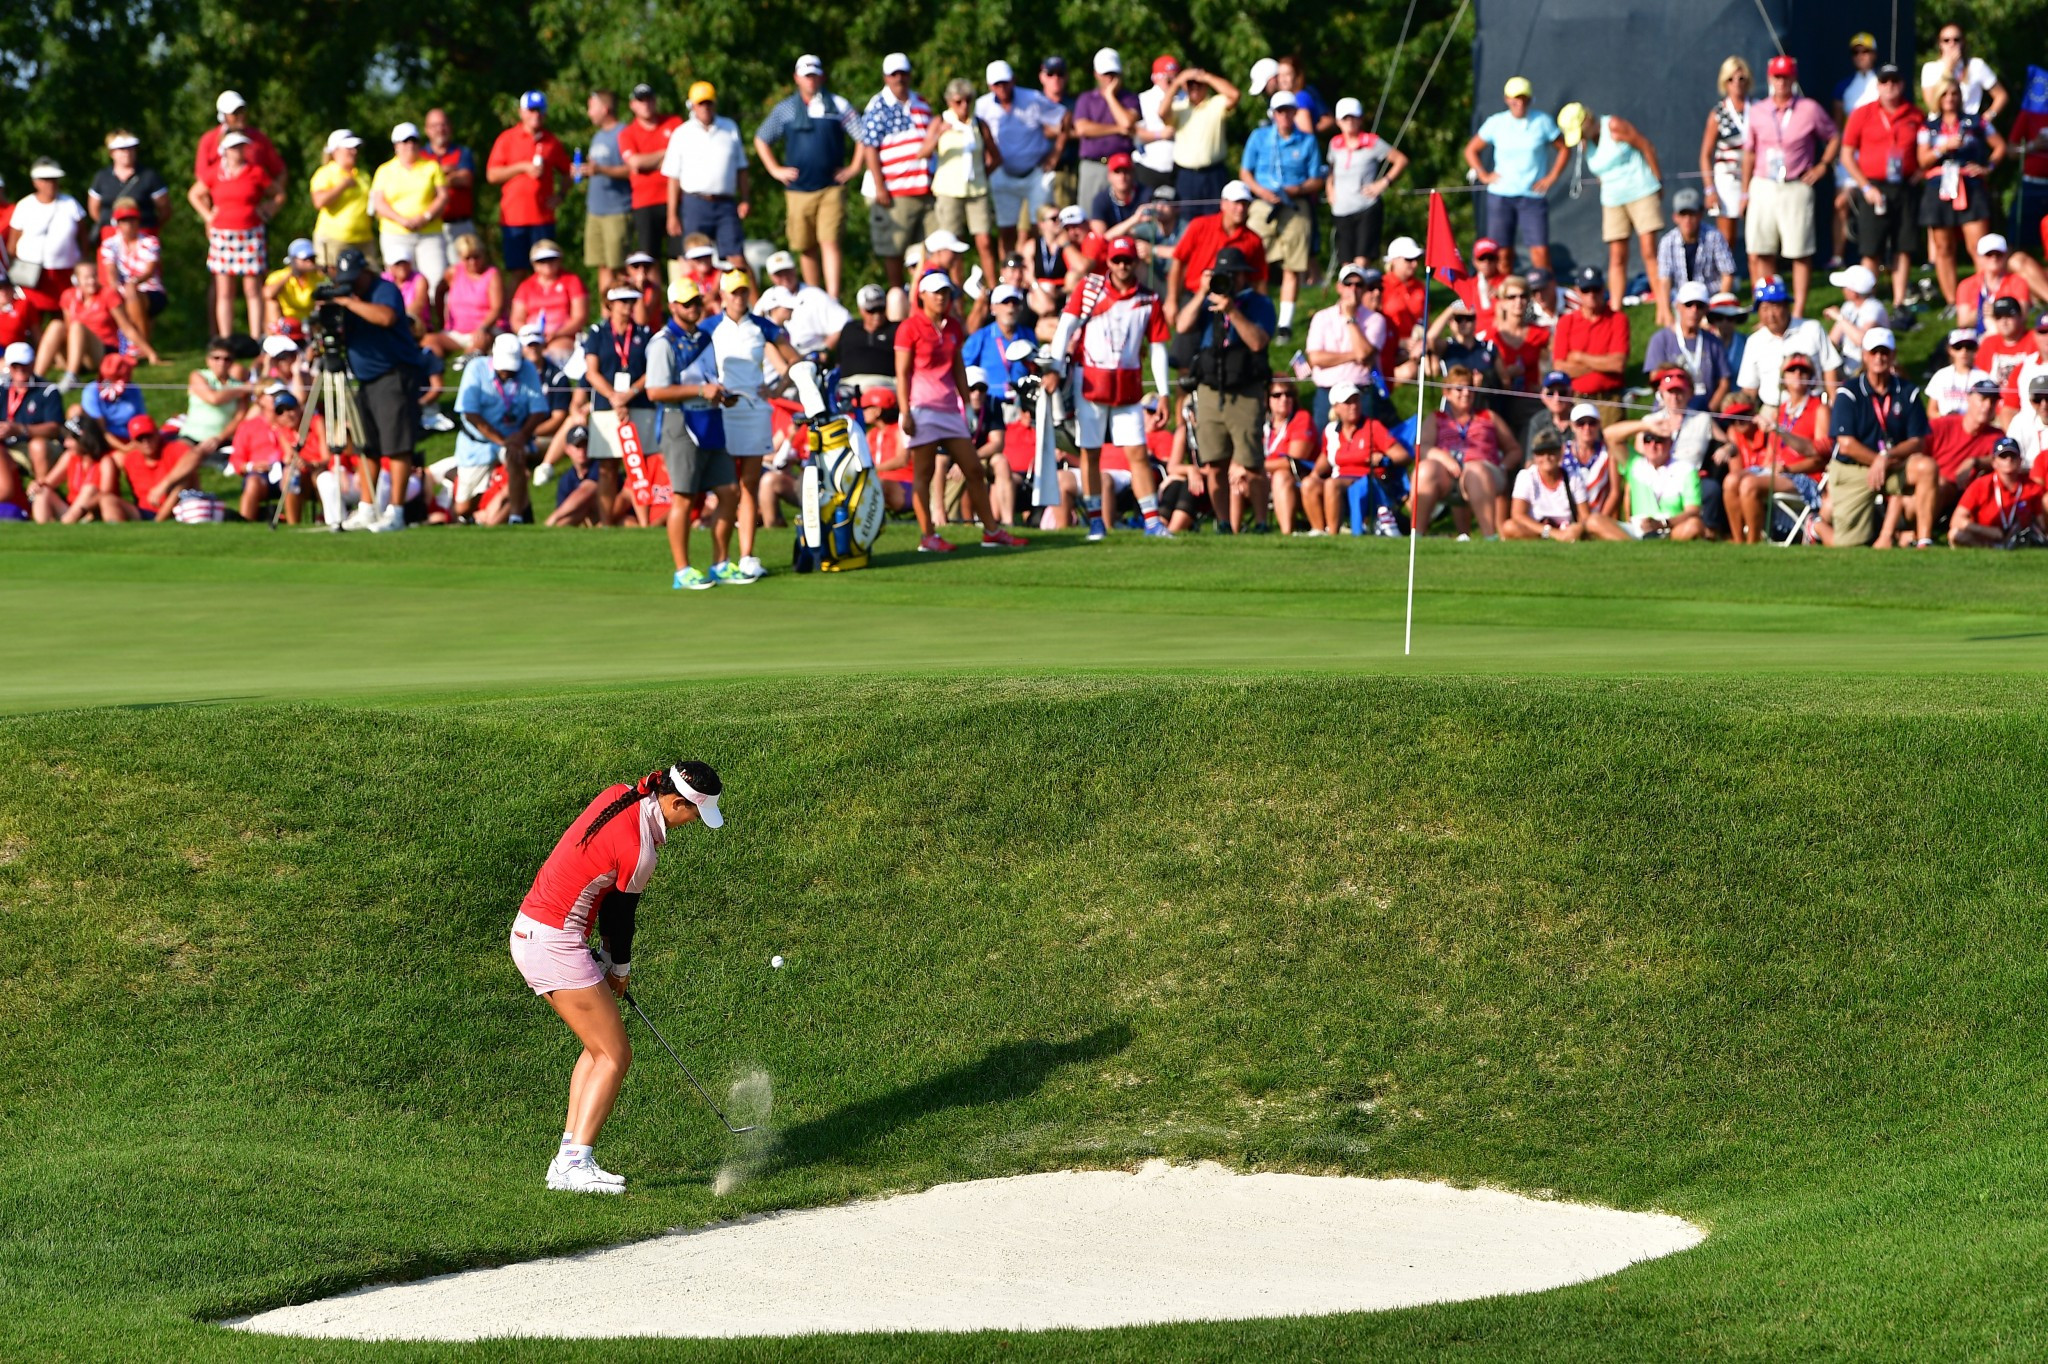 US enjoy dominant afternoon to take lead at Solheim Cup